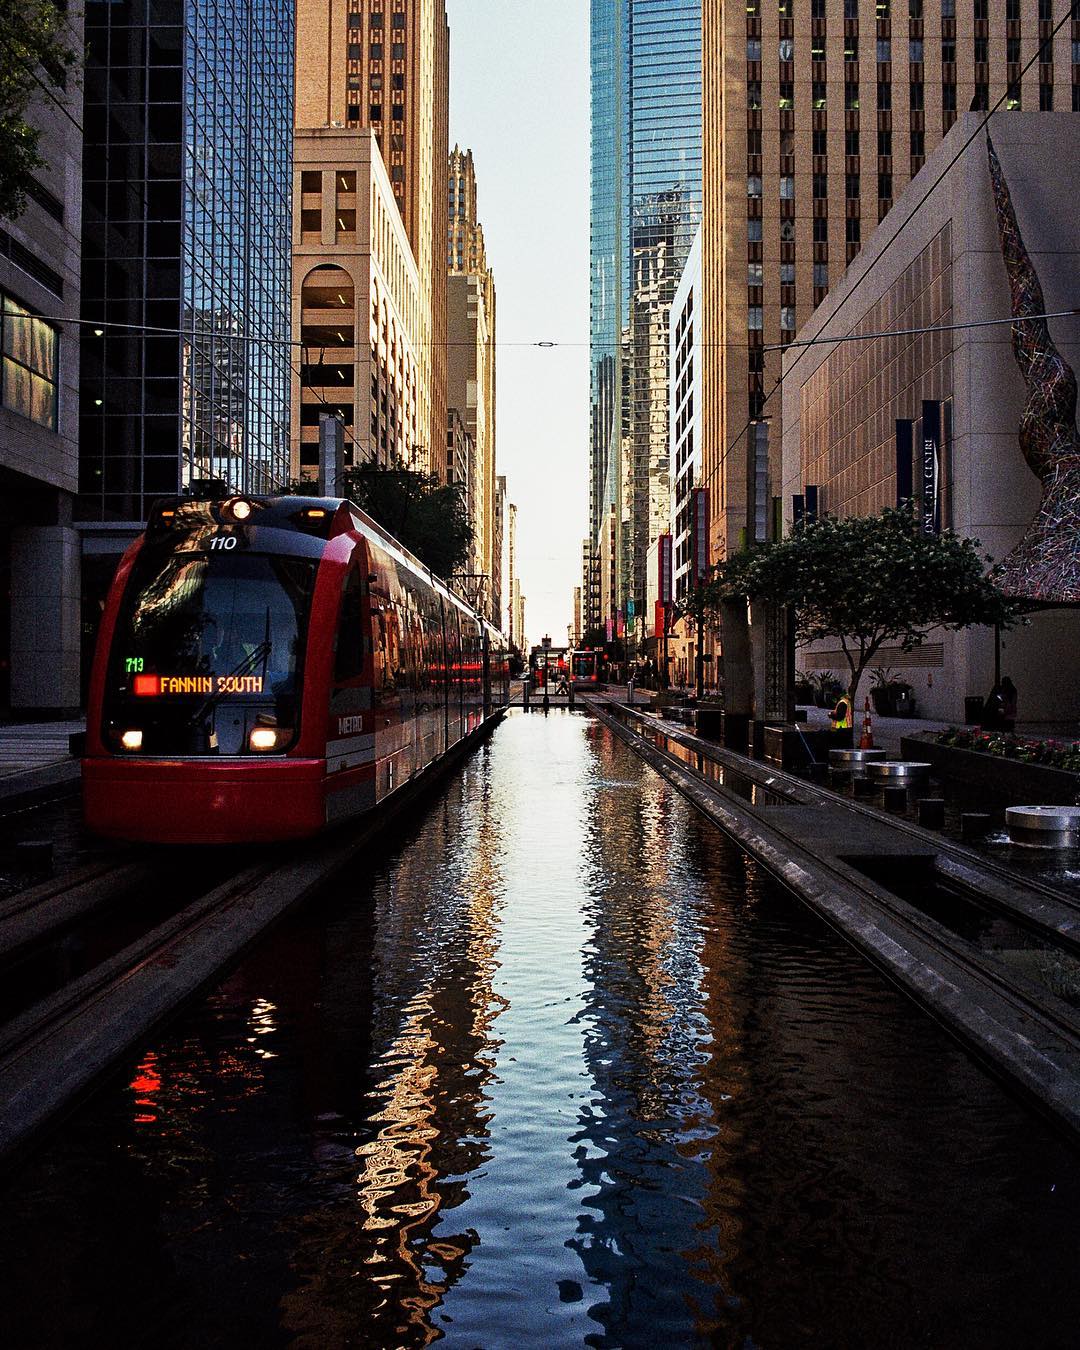 Looking down a canal in downtown houston where two amtracks travel. Photo by Instagram user @6th.man